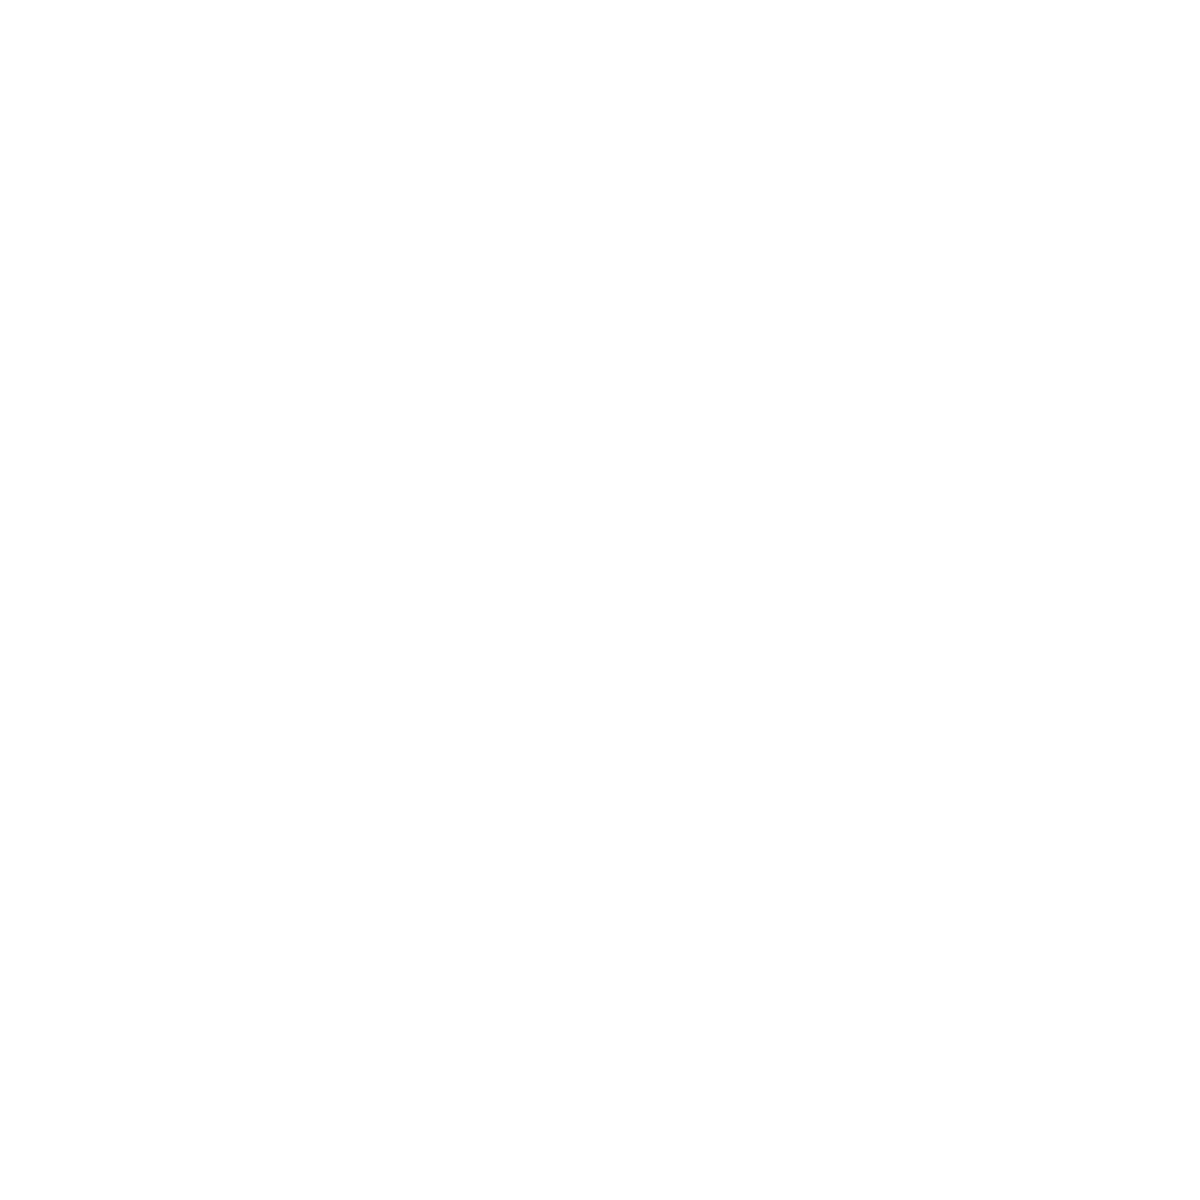 5 Minutes for Me